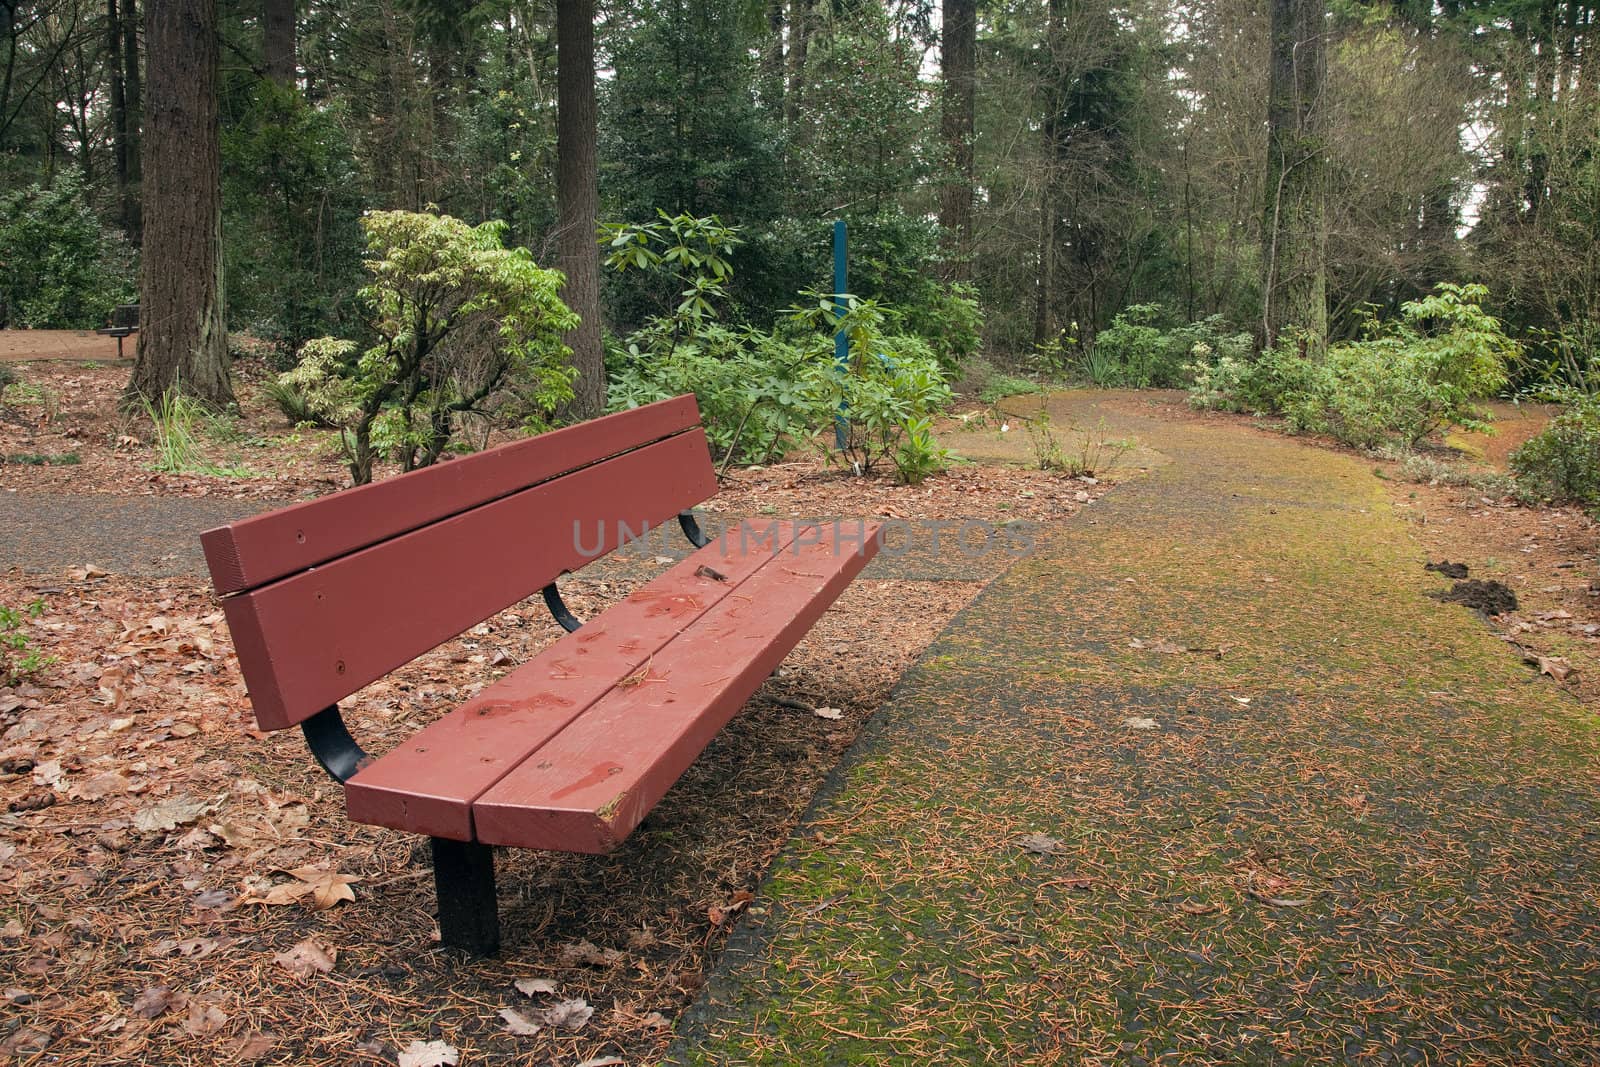 A bench and trail in a park, Portland OR. by Rigucci